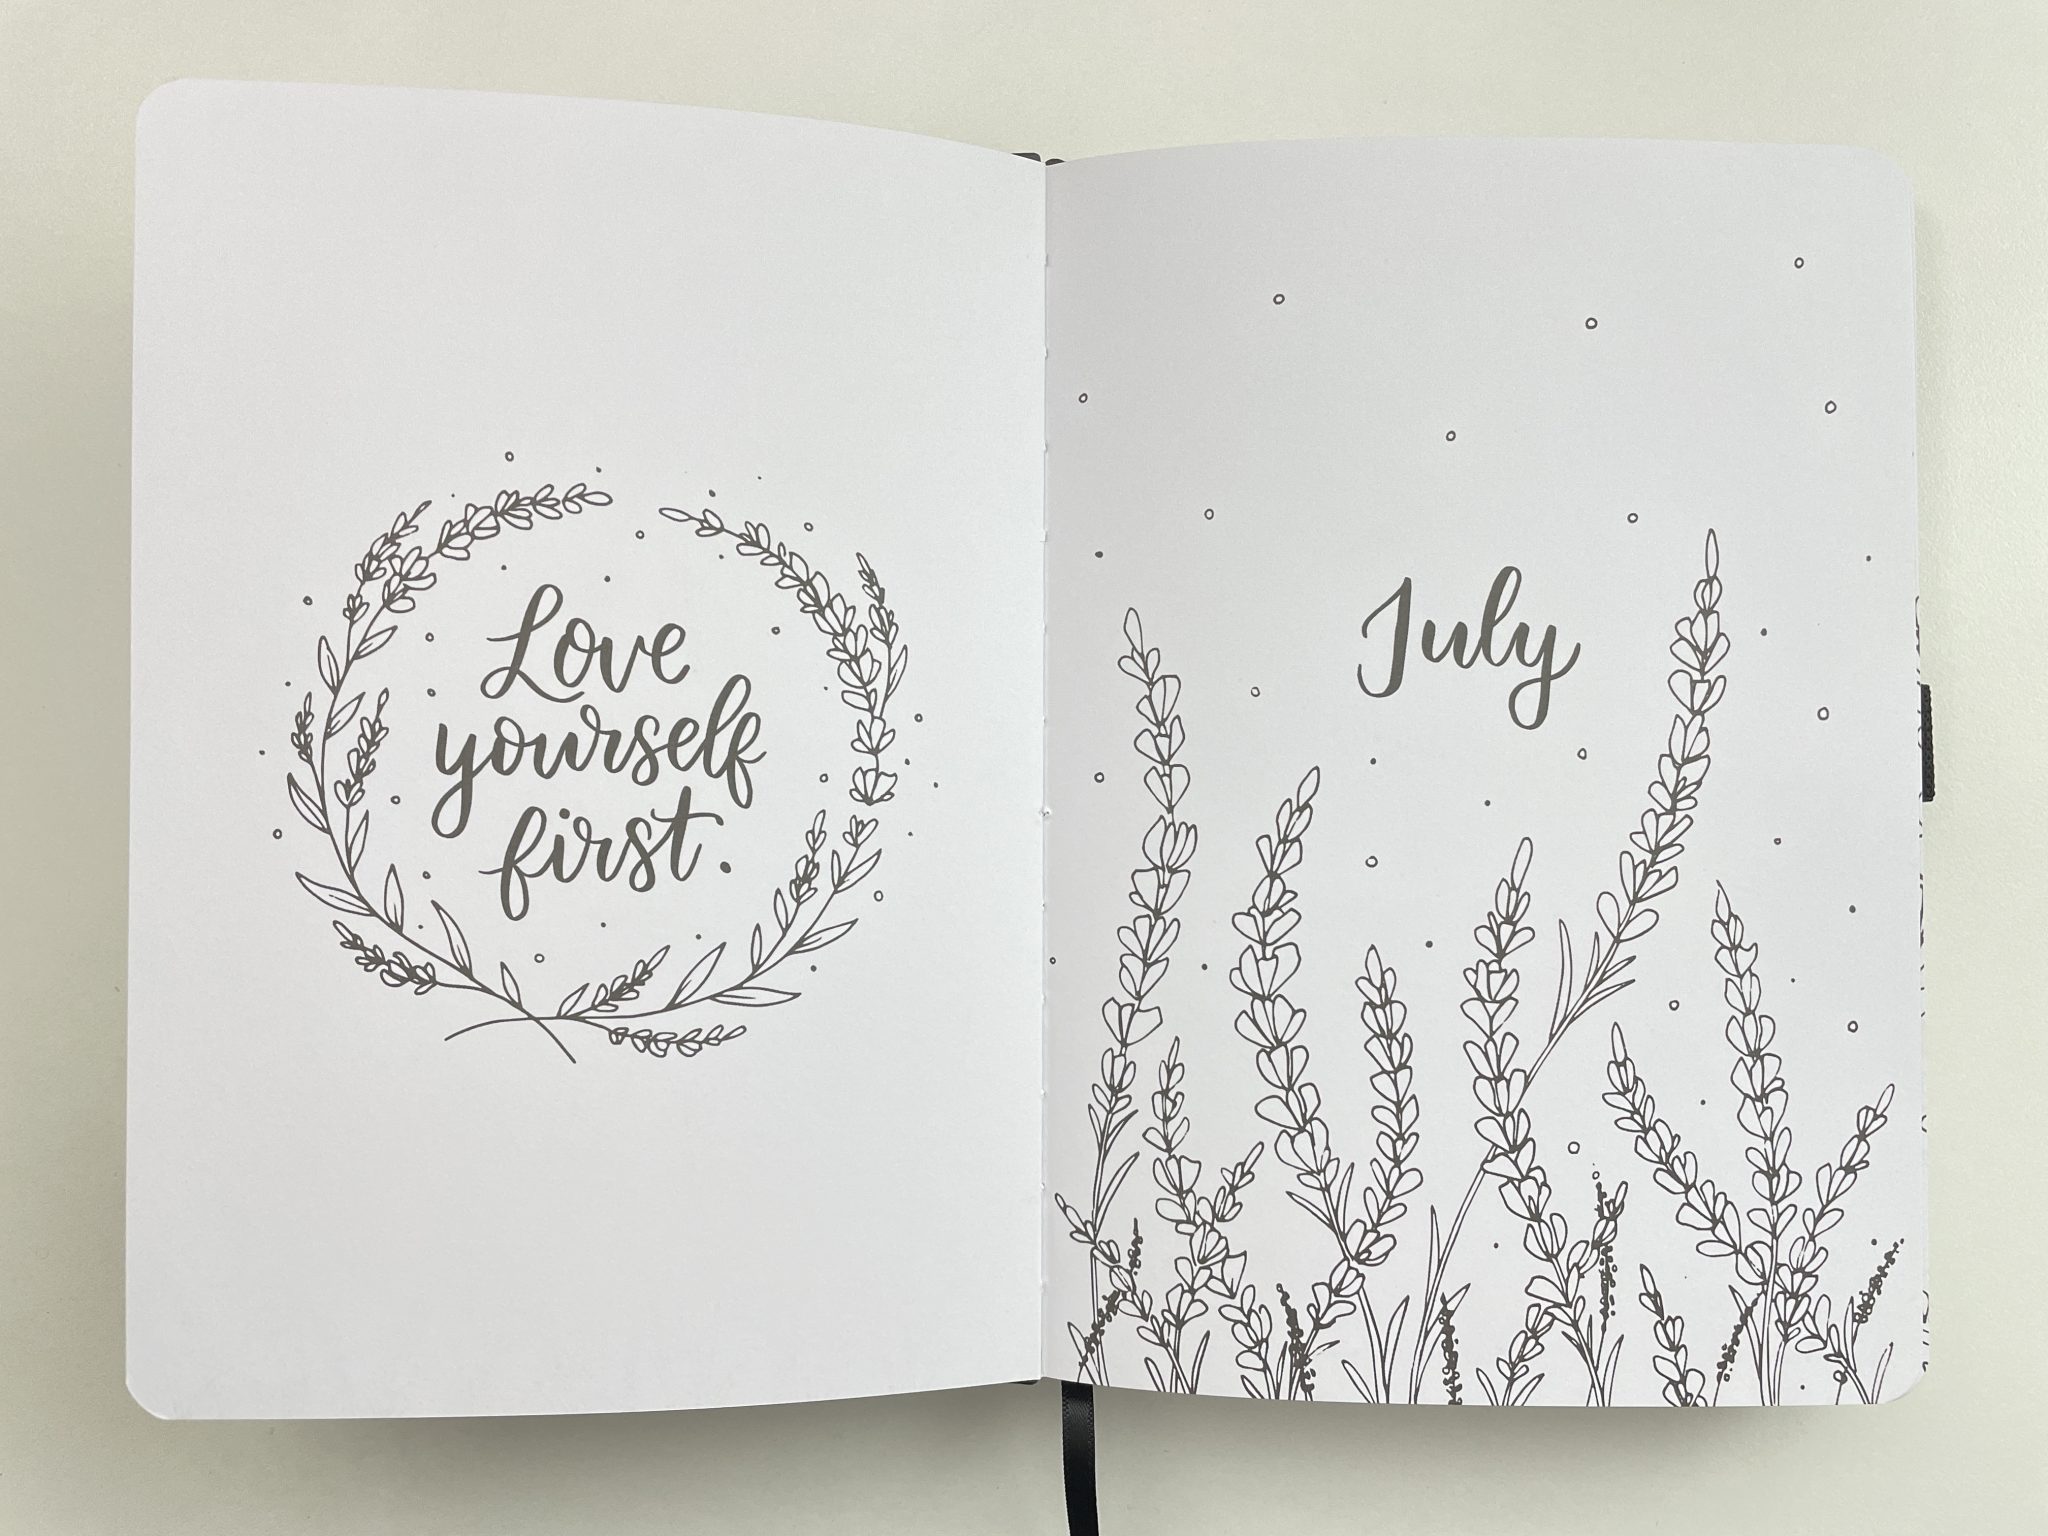 Amanda Rach Lee Doodle Planner Review (Pros & Cons) – All About Planners